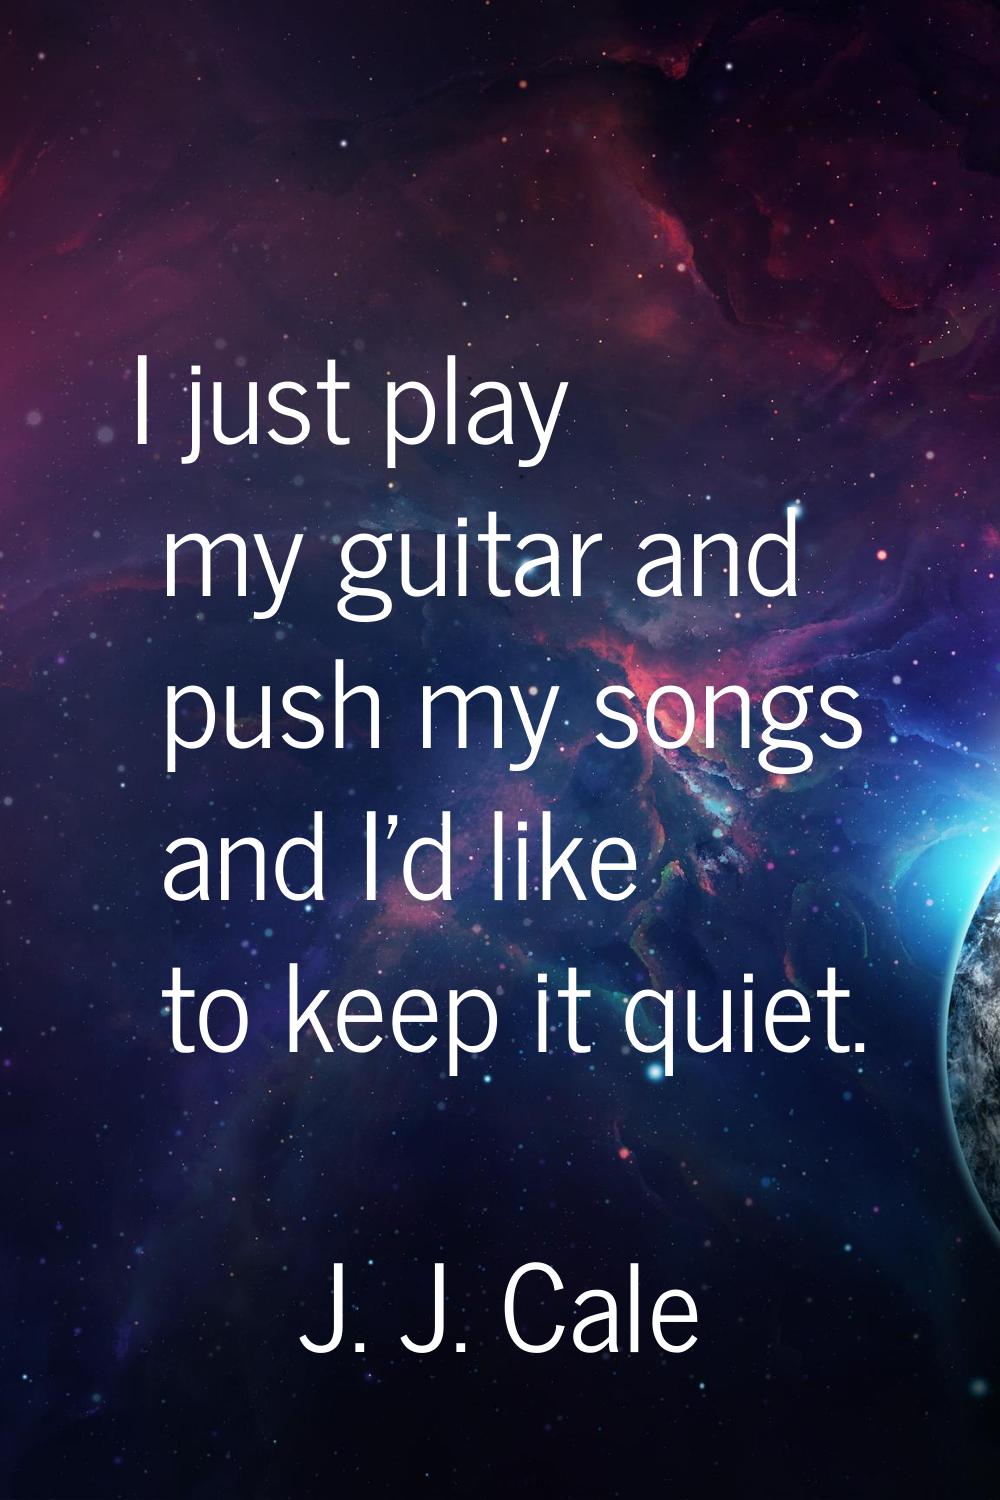 I just play my guitar and push my songs and I'd like to keep it quiet.